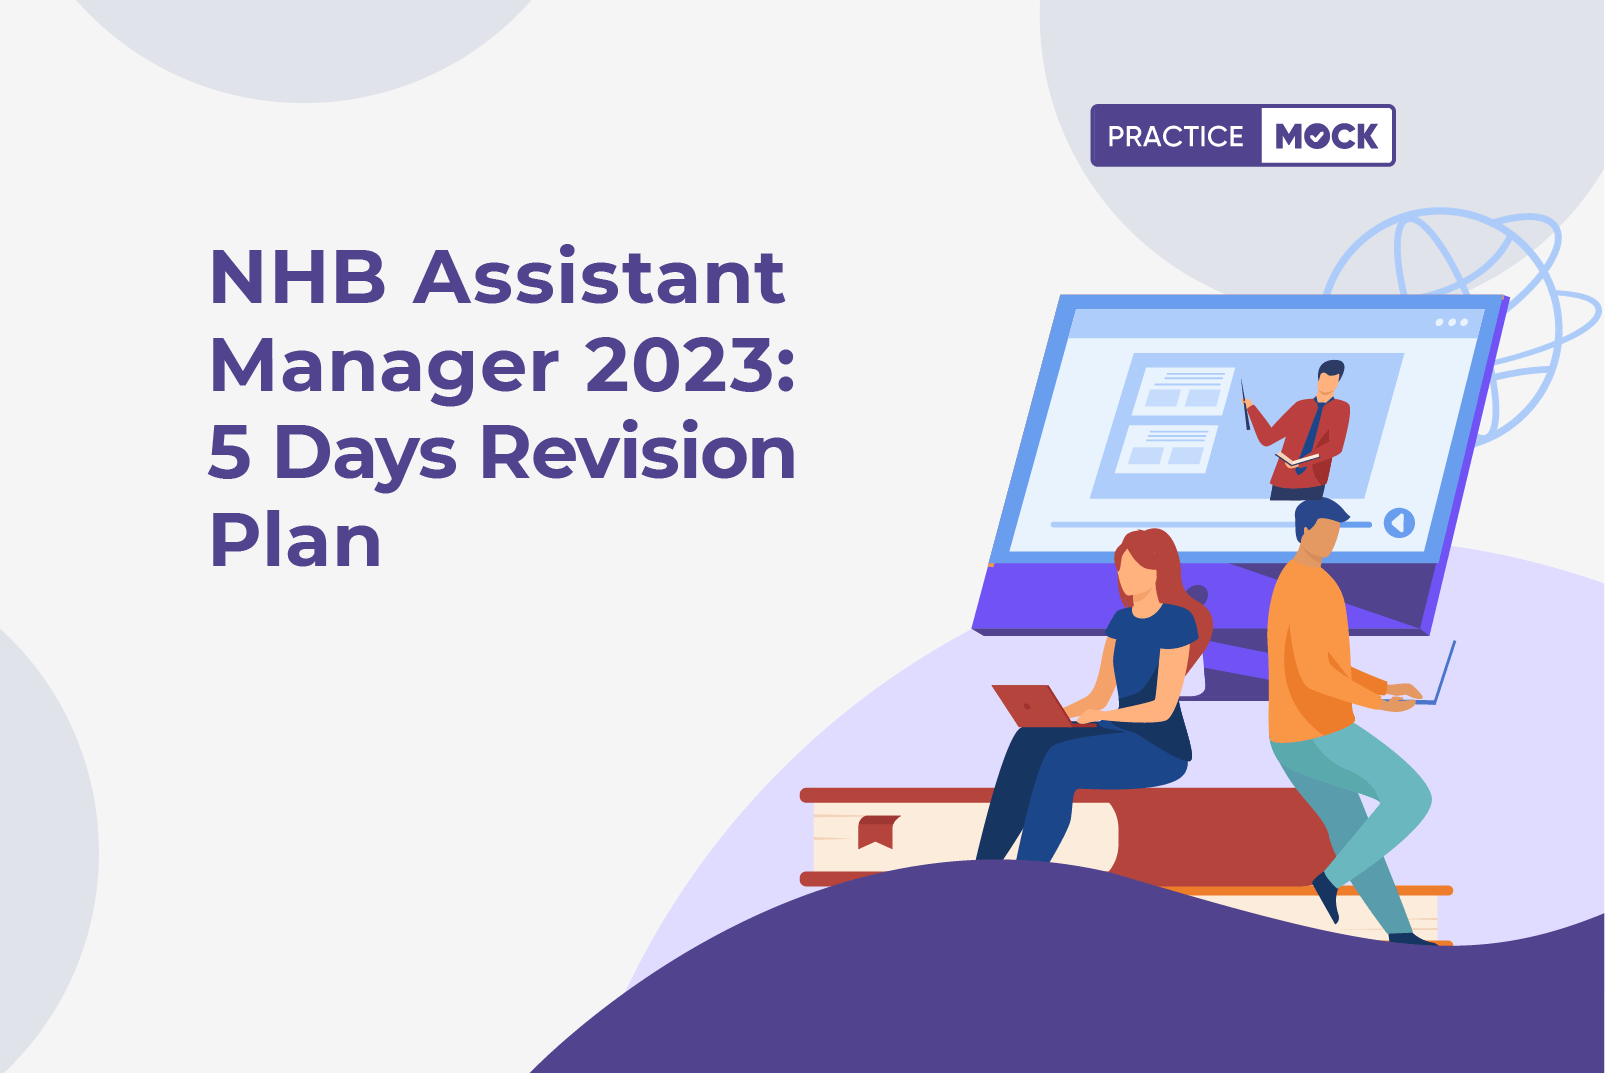 NHB Assistant Manager 2023 5 Days Revision Plan 